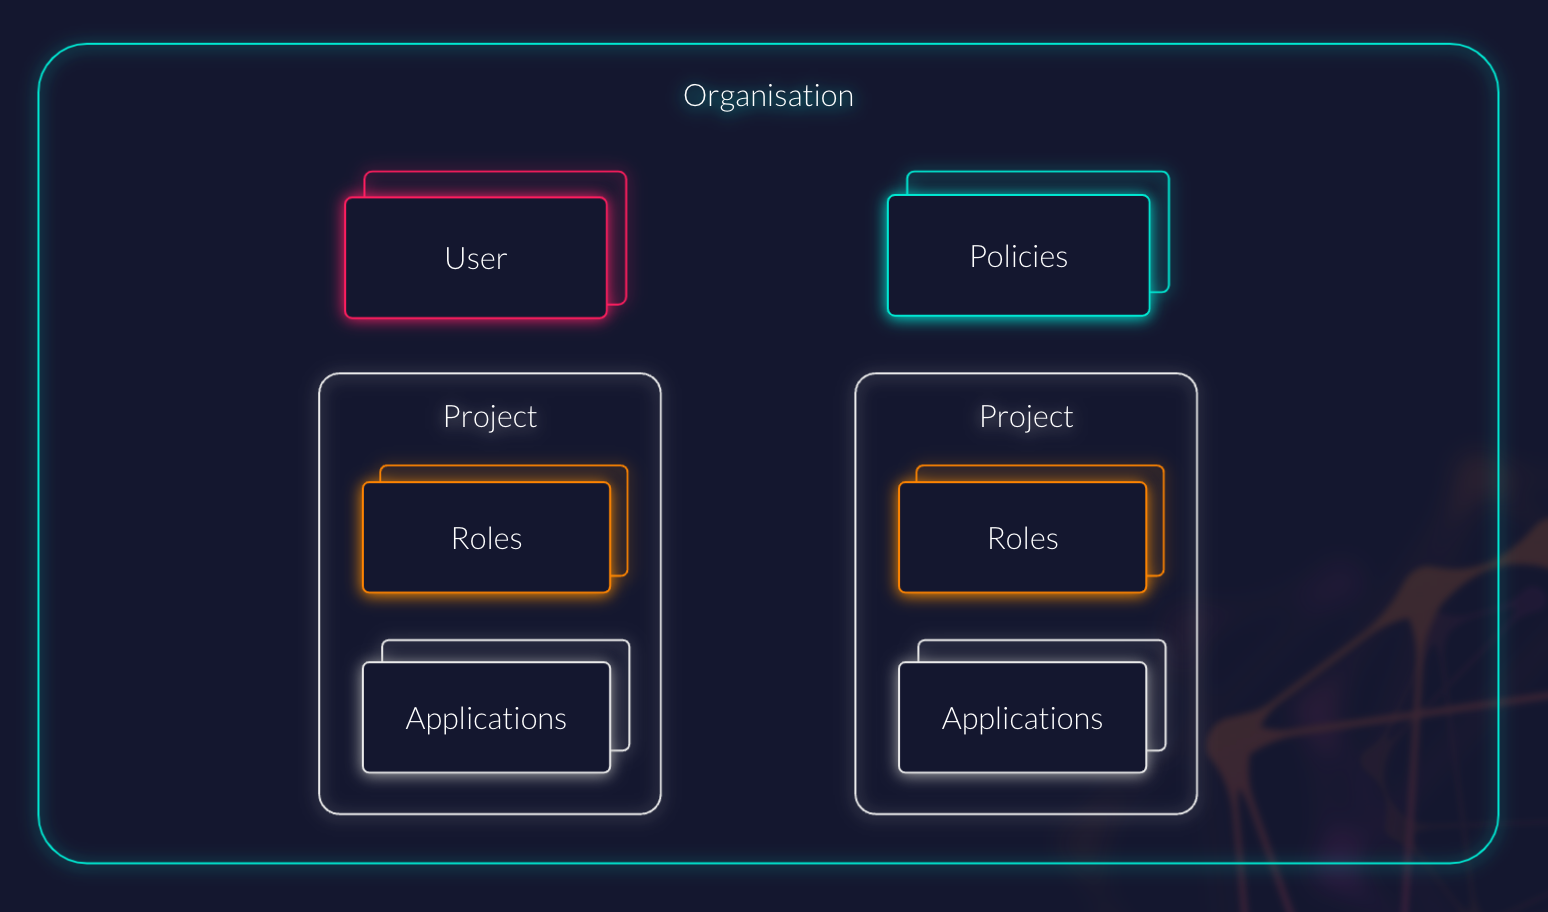 One organization holds users, policies, and projects. Each projects bundles multiple applications and roles.